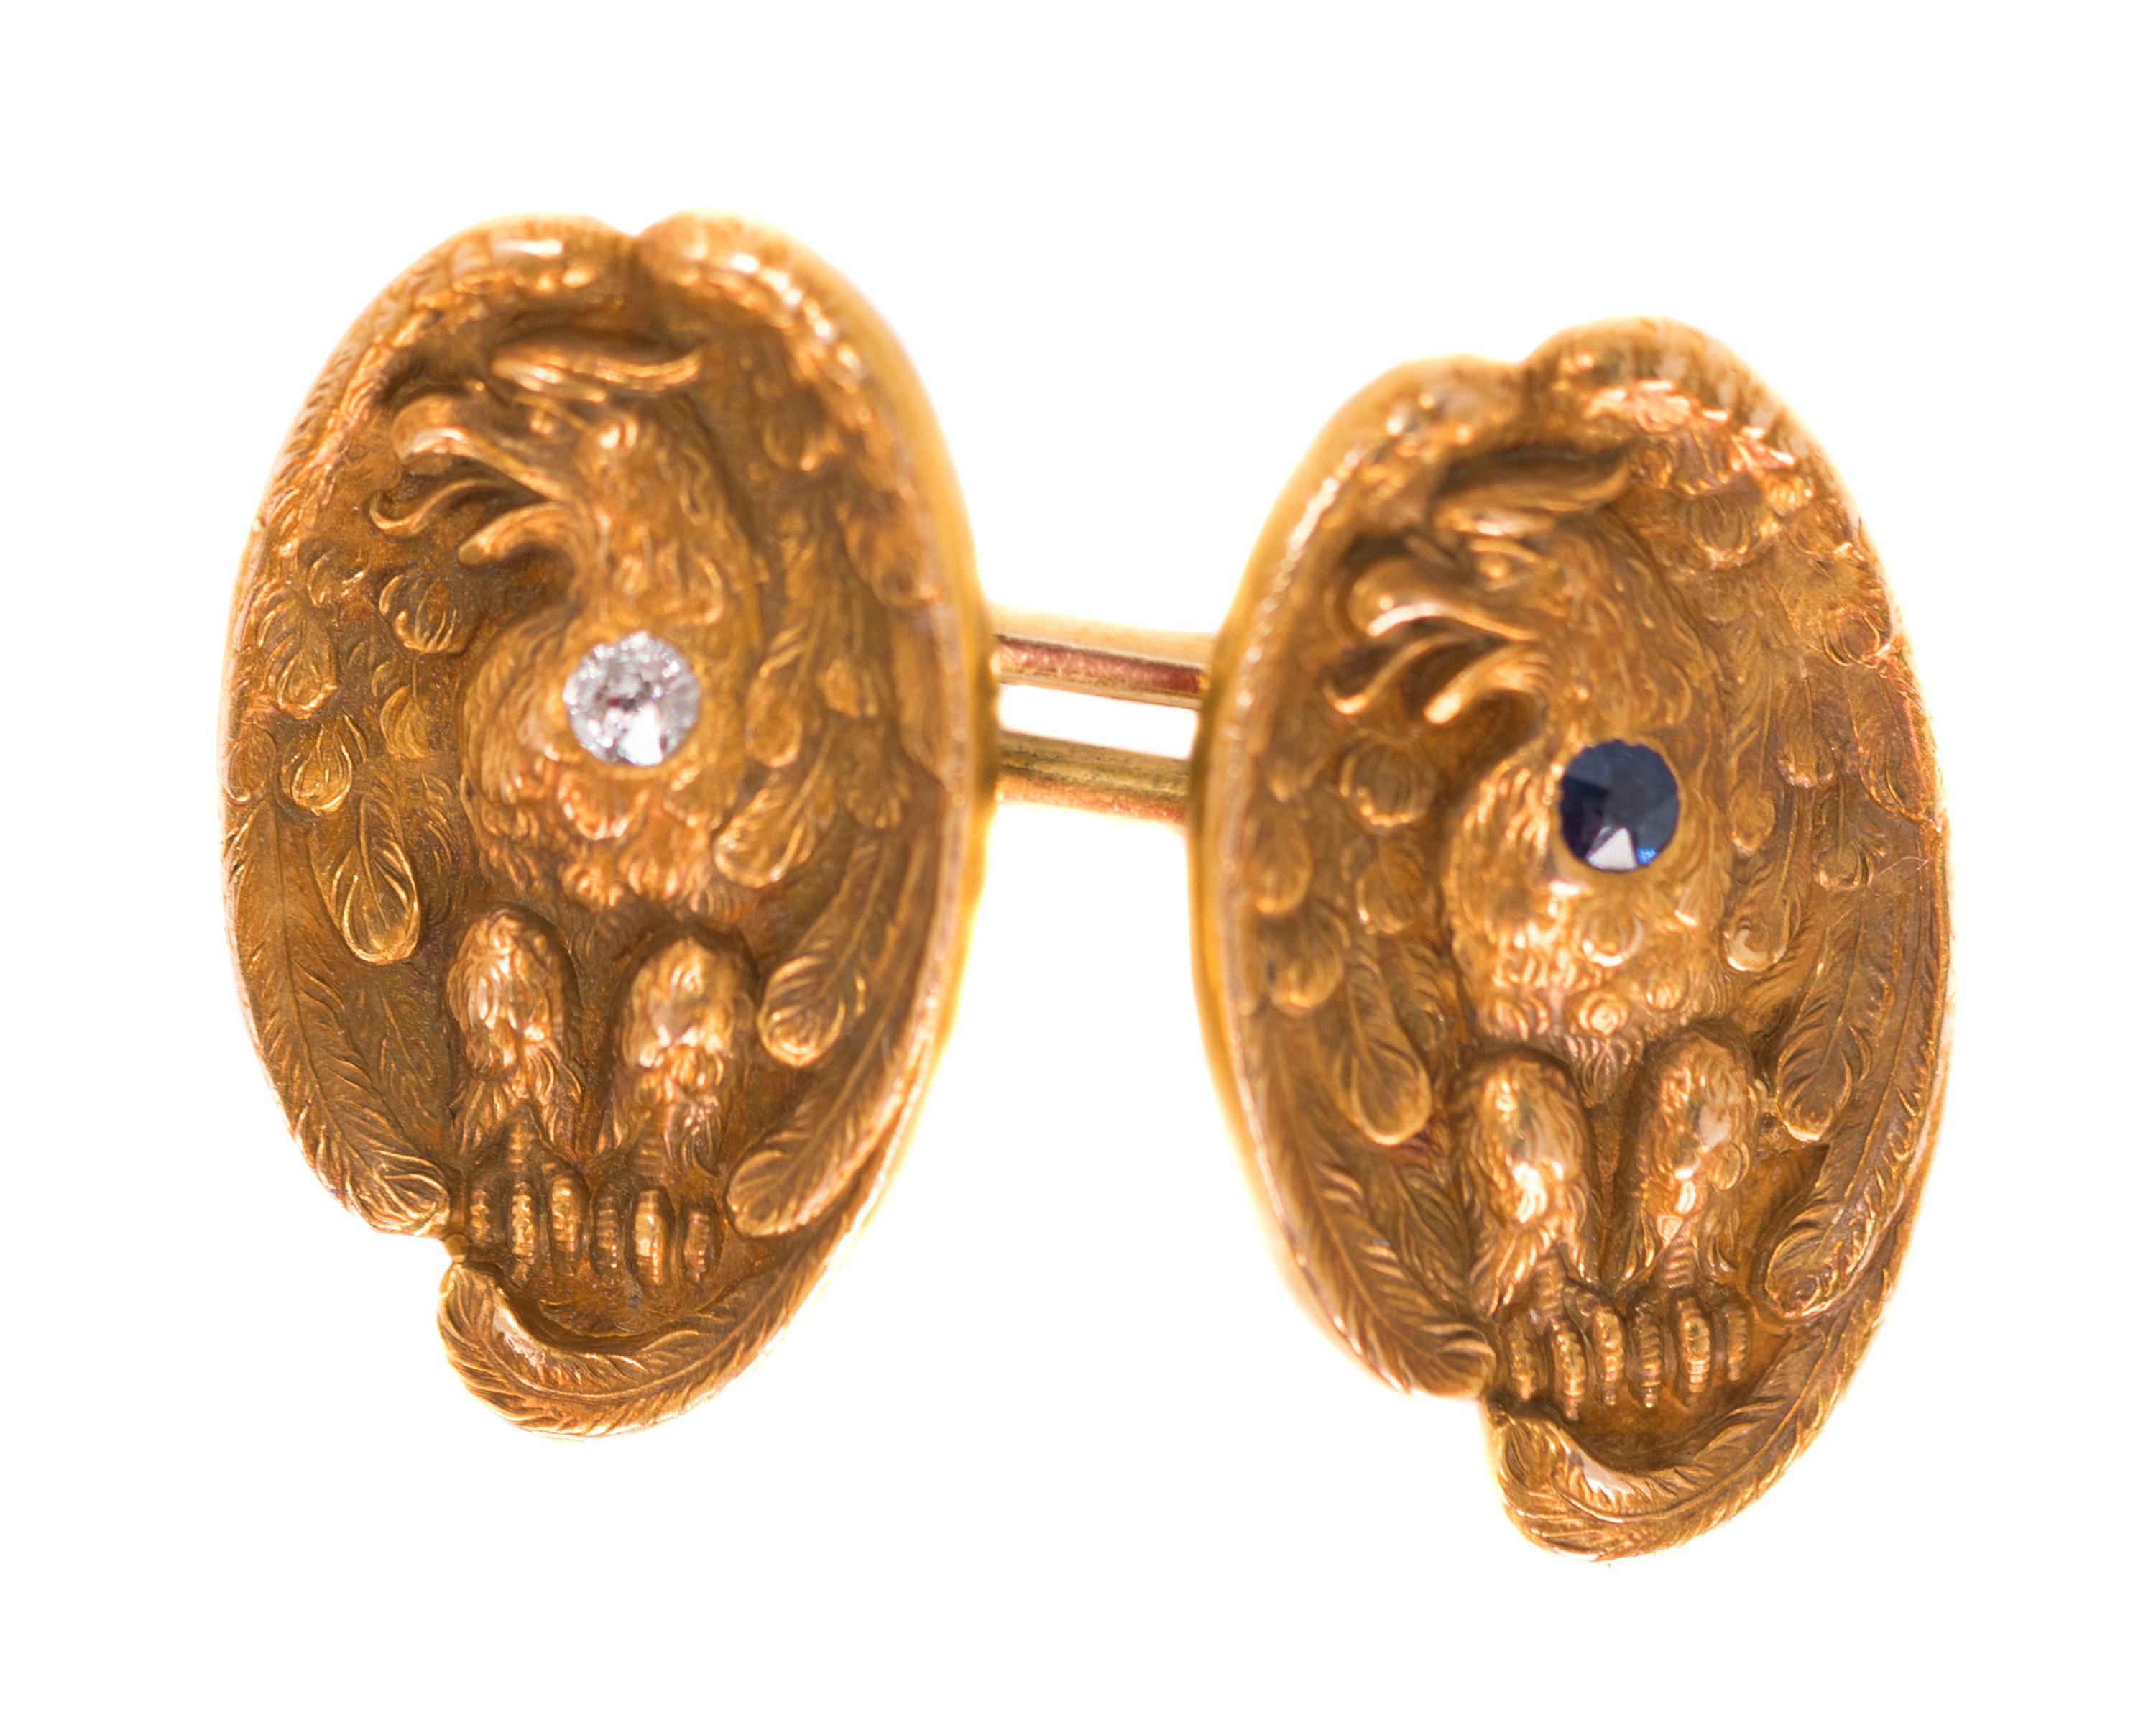 Antique Victorian Eagle Cufflinks - 14 Karat Yellow Gold, Diamonds, Sapphires

Features:
Chain Link Cufflinks
14 Karat Yellow Gold
Eagle image on each link with a gemstone set on the Eagle's chest
2 Blue Sapphires and 2 Old Mine Diamonds
Eagle wings